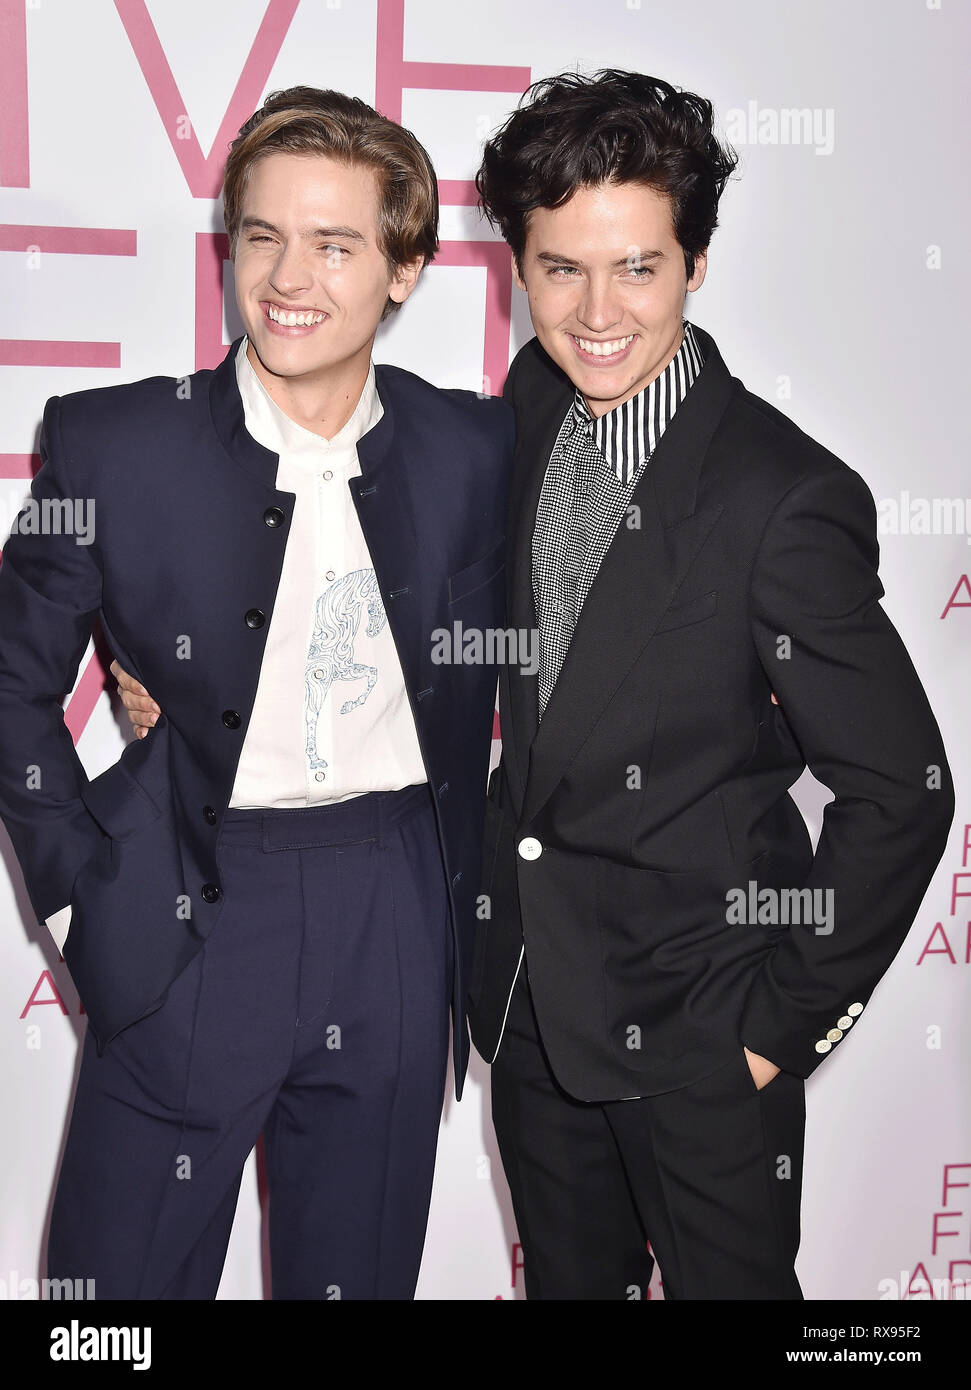 WESTWOOD, CA - MARCH 07: Dylan Spouse (L) and Cole Sprouse attend the Premiere Of Lionsgate's 'Five Feet Apart' at Fox Bruin Theatre on March 07, 2019 Stock Photo